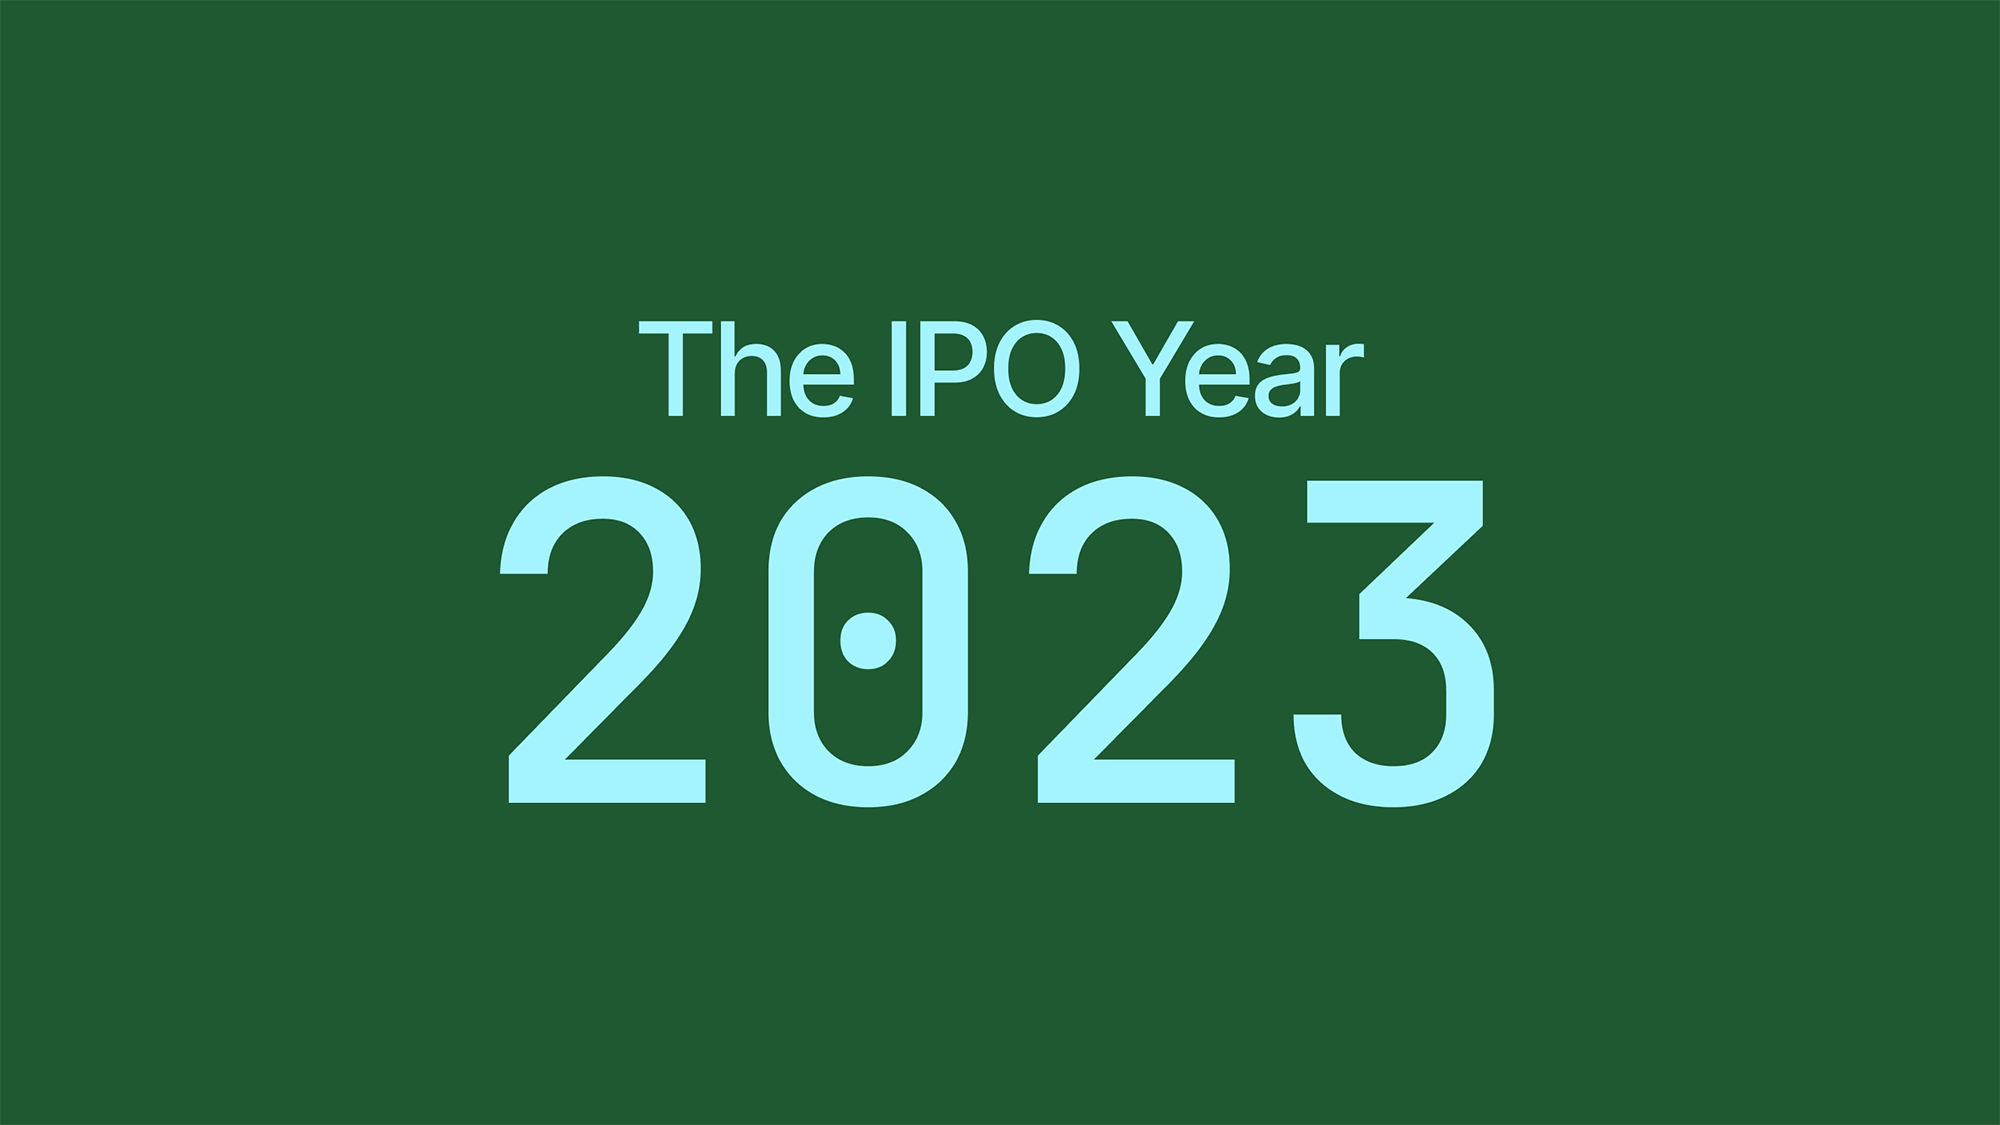 The IPO Year 2023